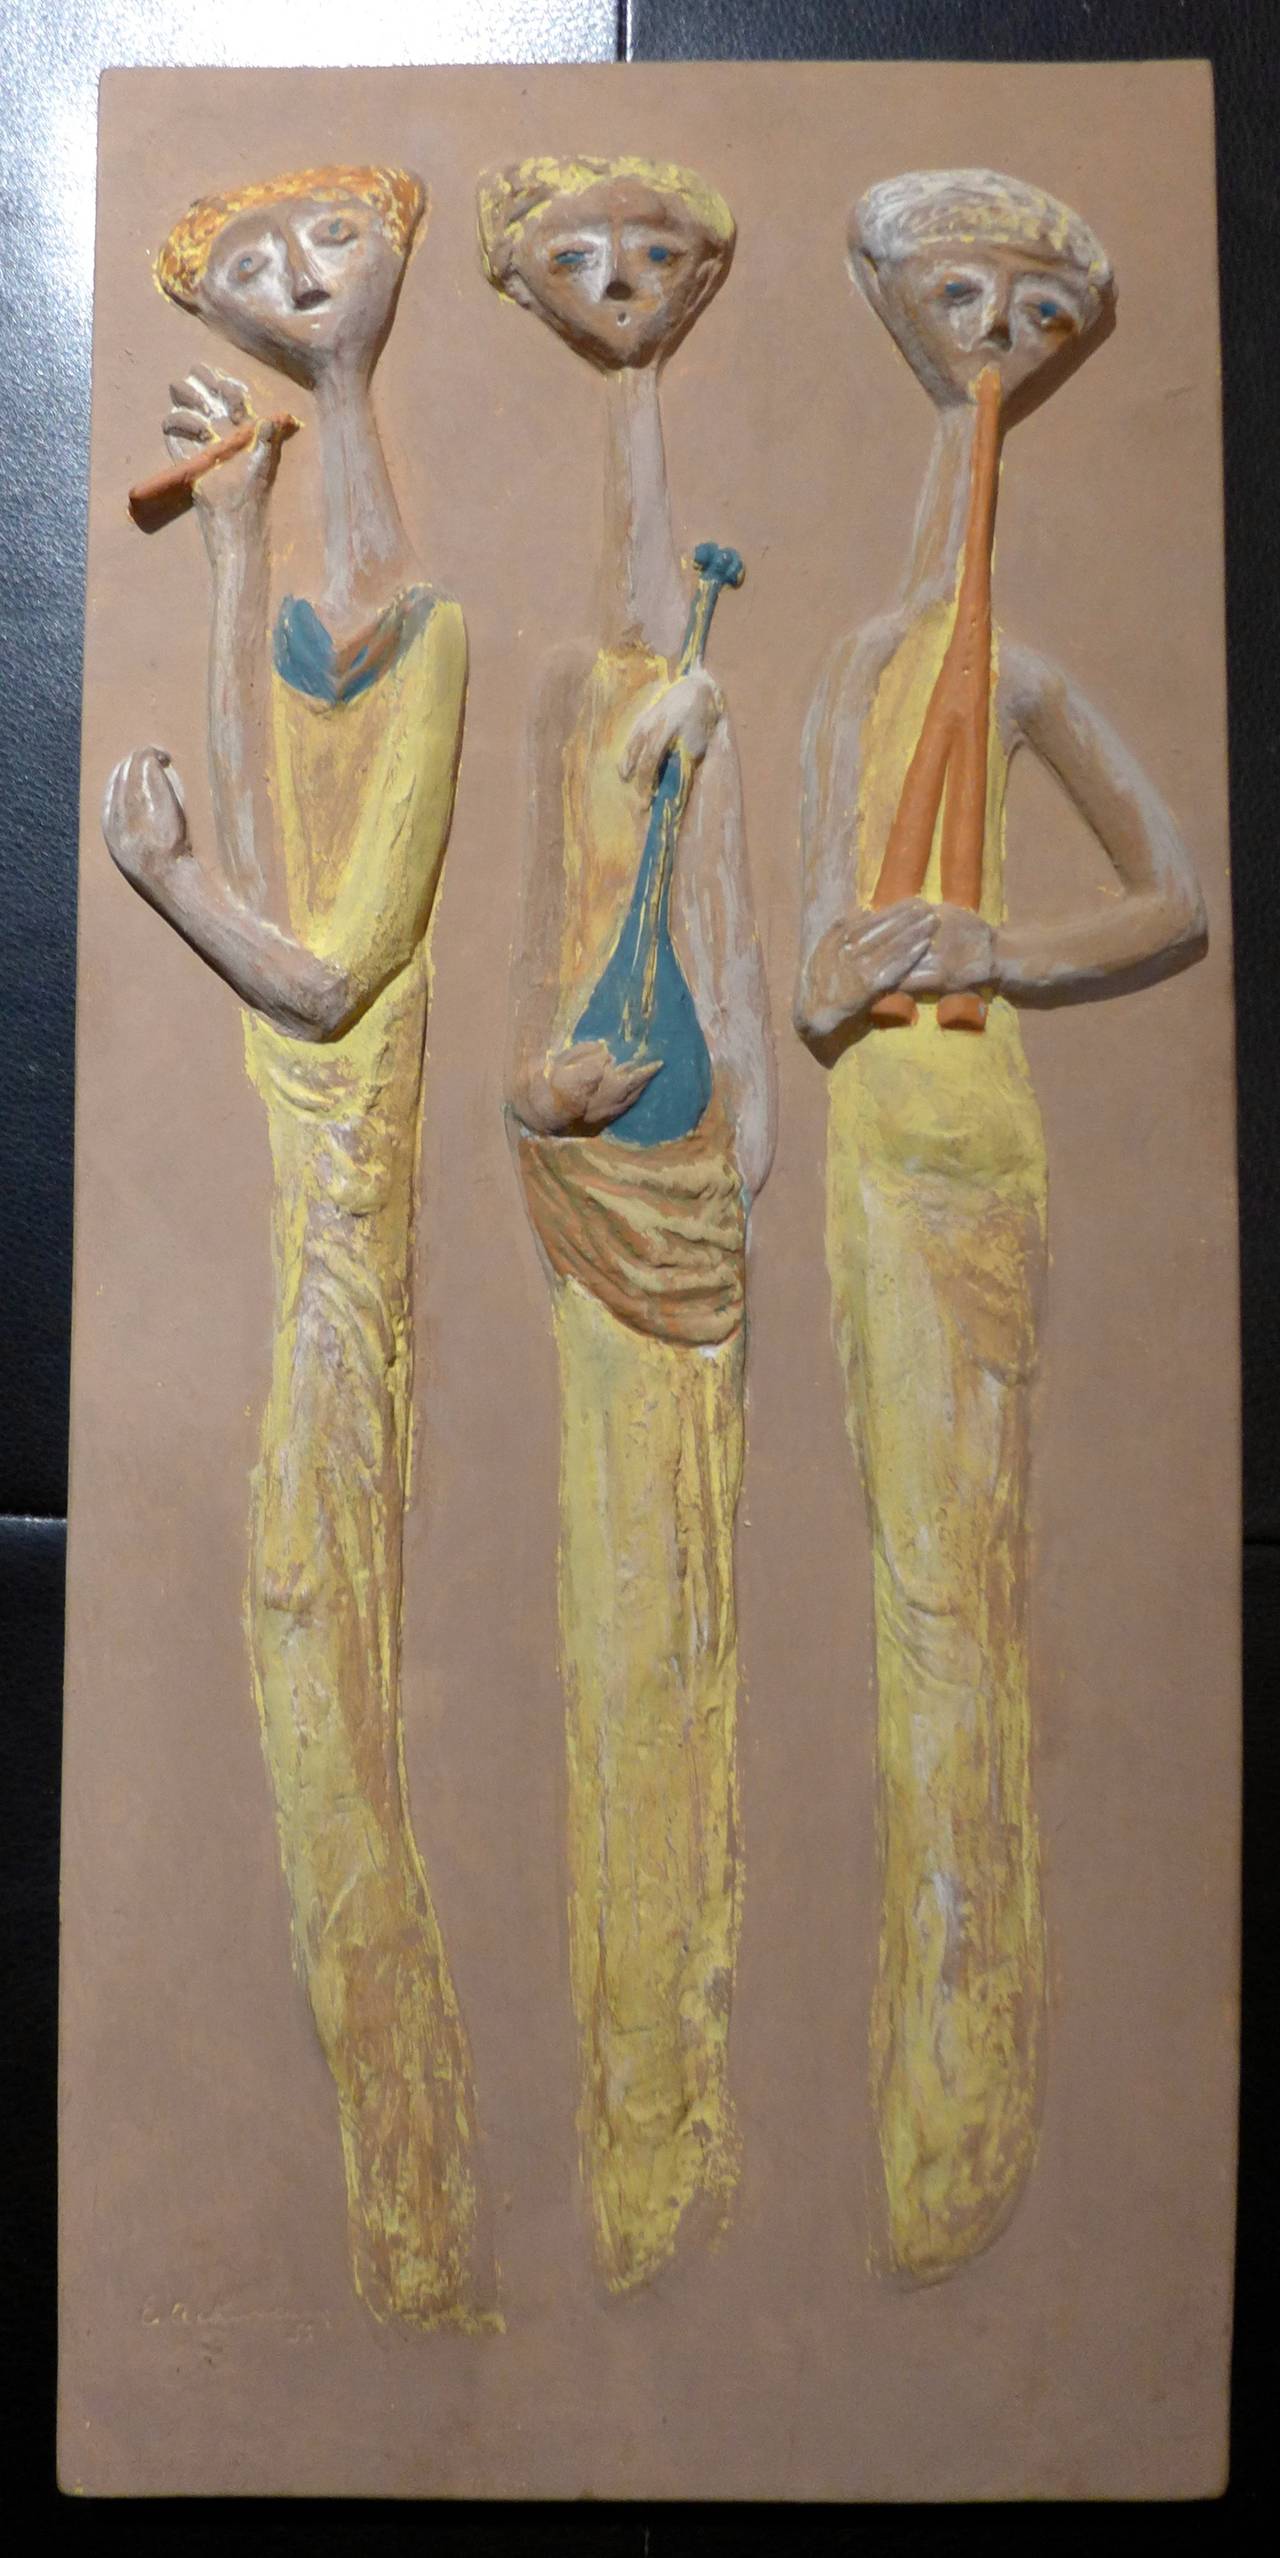 Wall plaque of hand-painted hydrostone (a hard plaster) by California designer and artist Evelyn Ackerman, signed and dated 1955. A rare Ackerman work in this material, done before the later success of Era Industries, her design business with